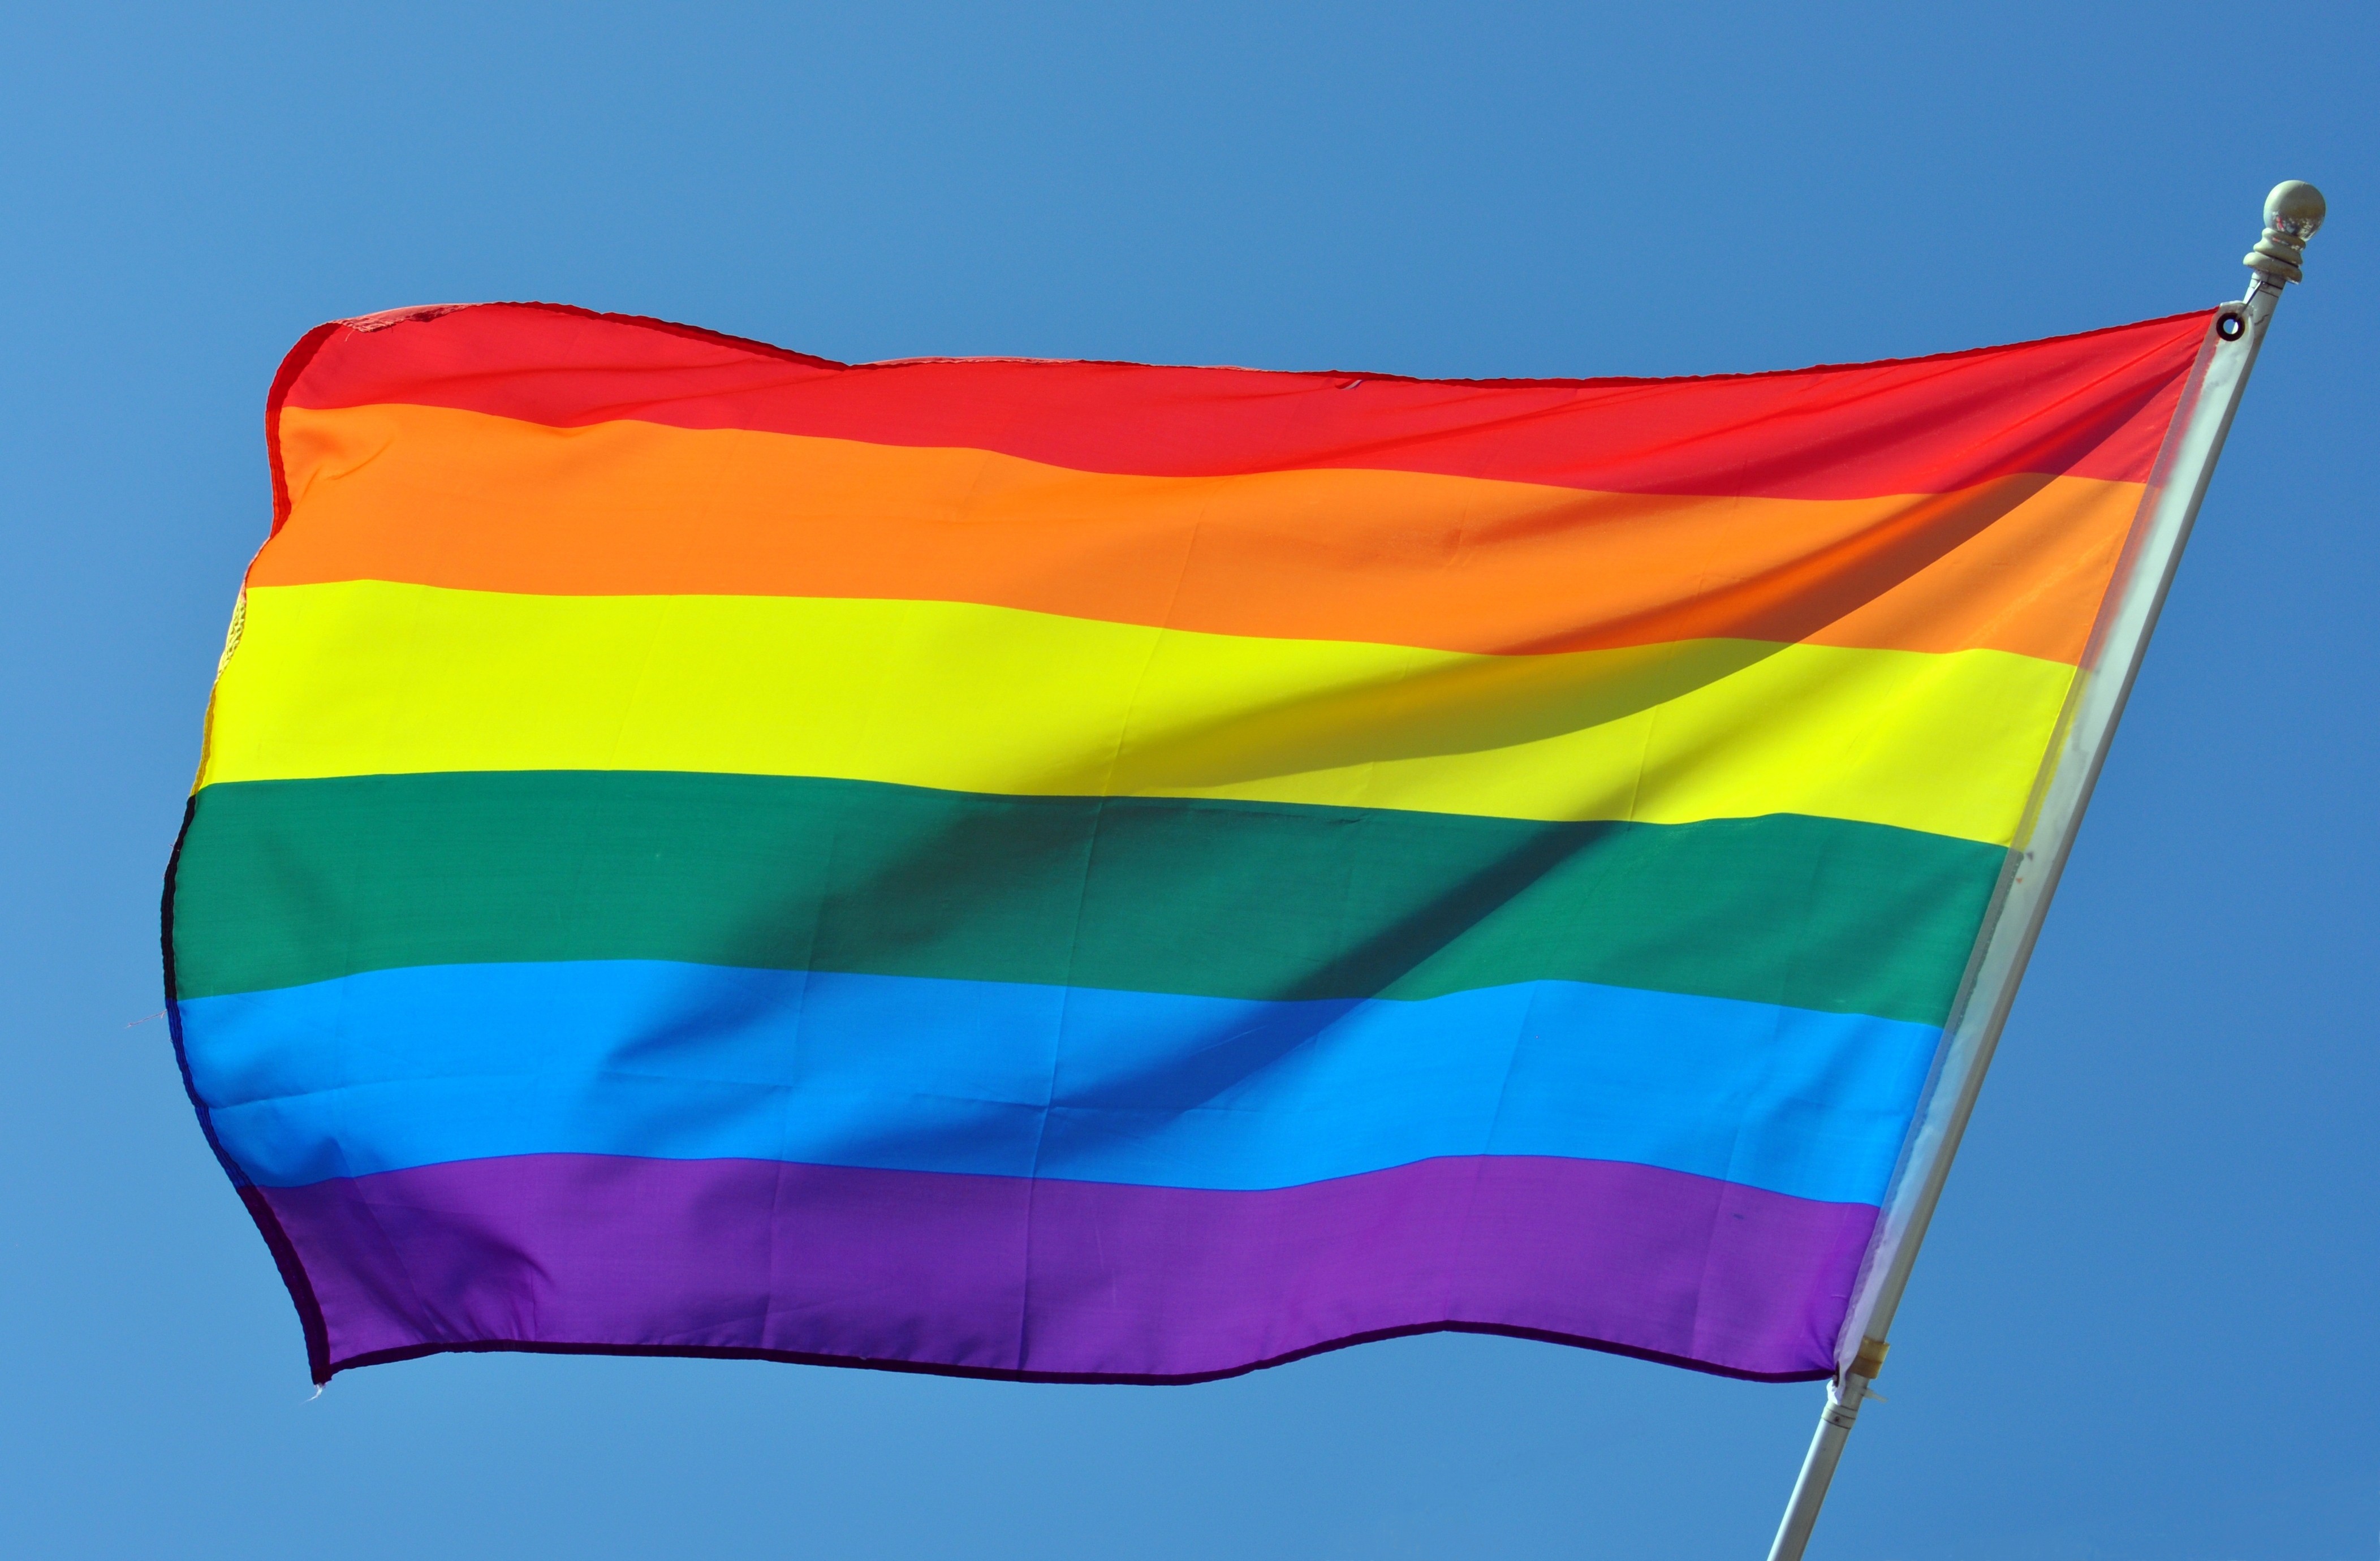 A Chinese gay man has successfully sued a mental hospital over forced conversion therapy, a win described by activists as a first in the country. Photo: Shutterstock